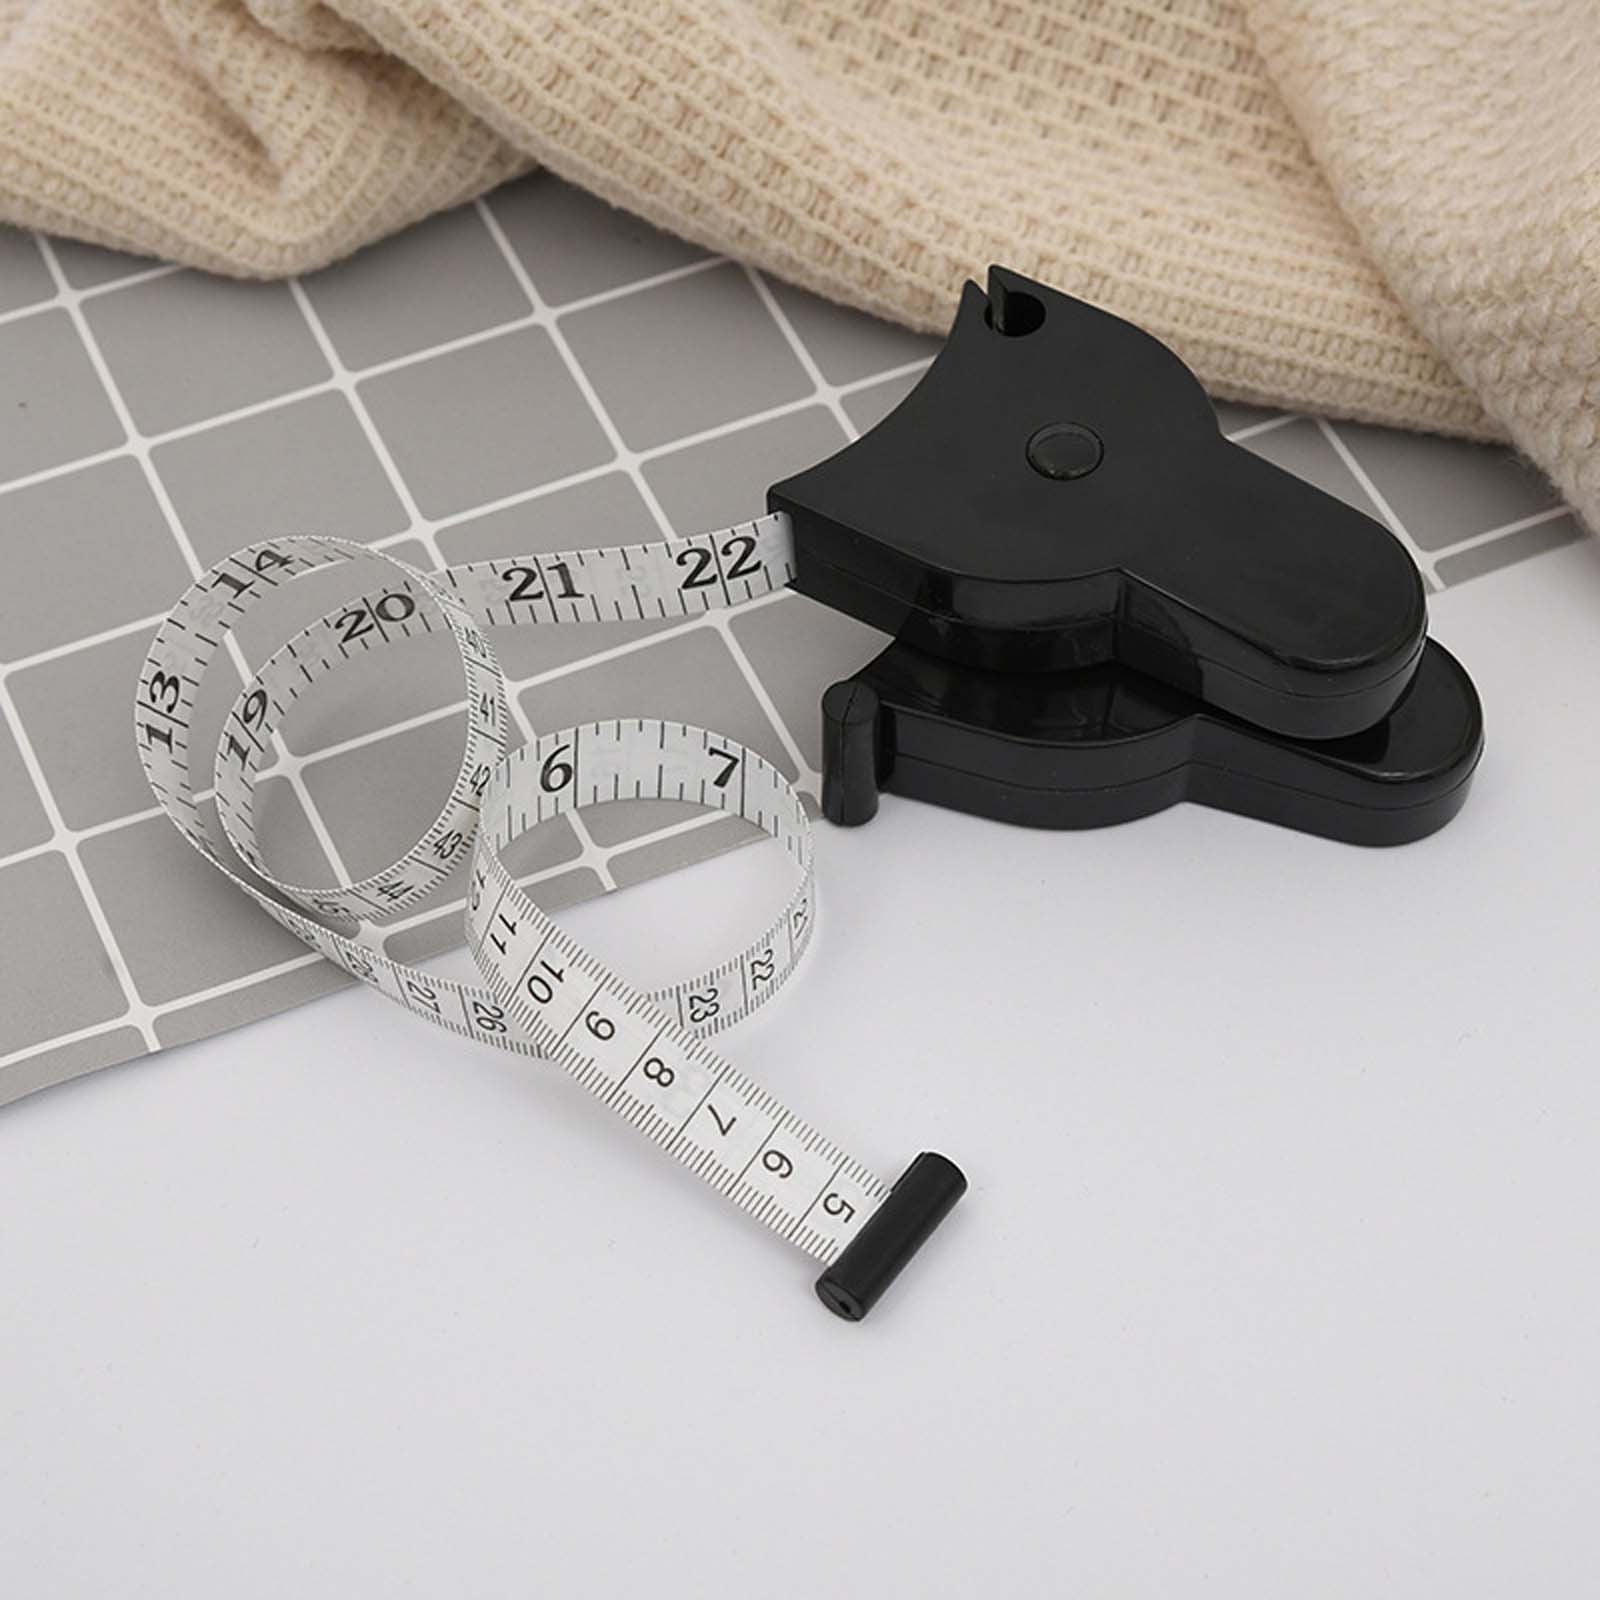 Wholesale Fitness Fat Caliper Perfect Body Tape Measures Automatic  Telescopic Tape Measure Retractable Measuring Tape For Body Waist Hip  B7125451 From Hvzm, $0.56